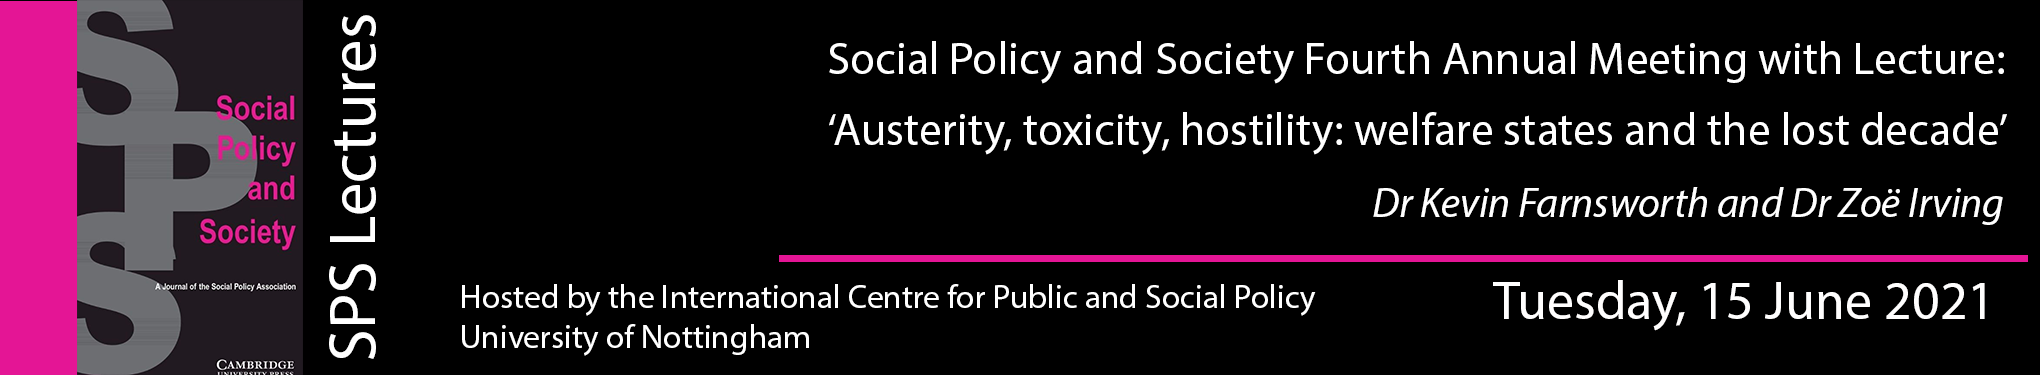 Social Policy and Society fourth annual lecture on Austerity, toxicity, hostility: welfare states and the lost decade